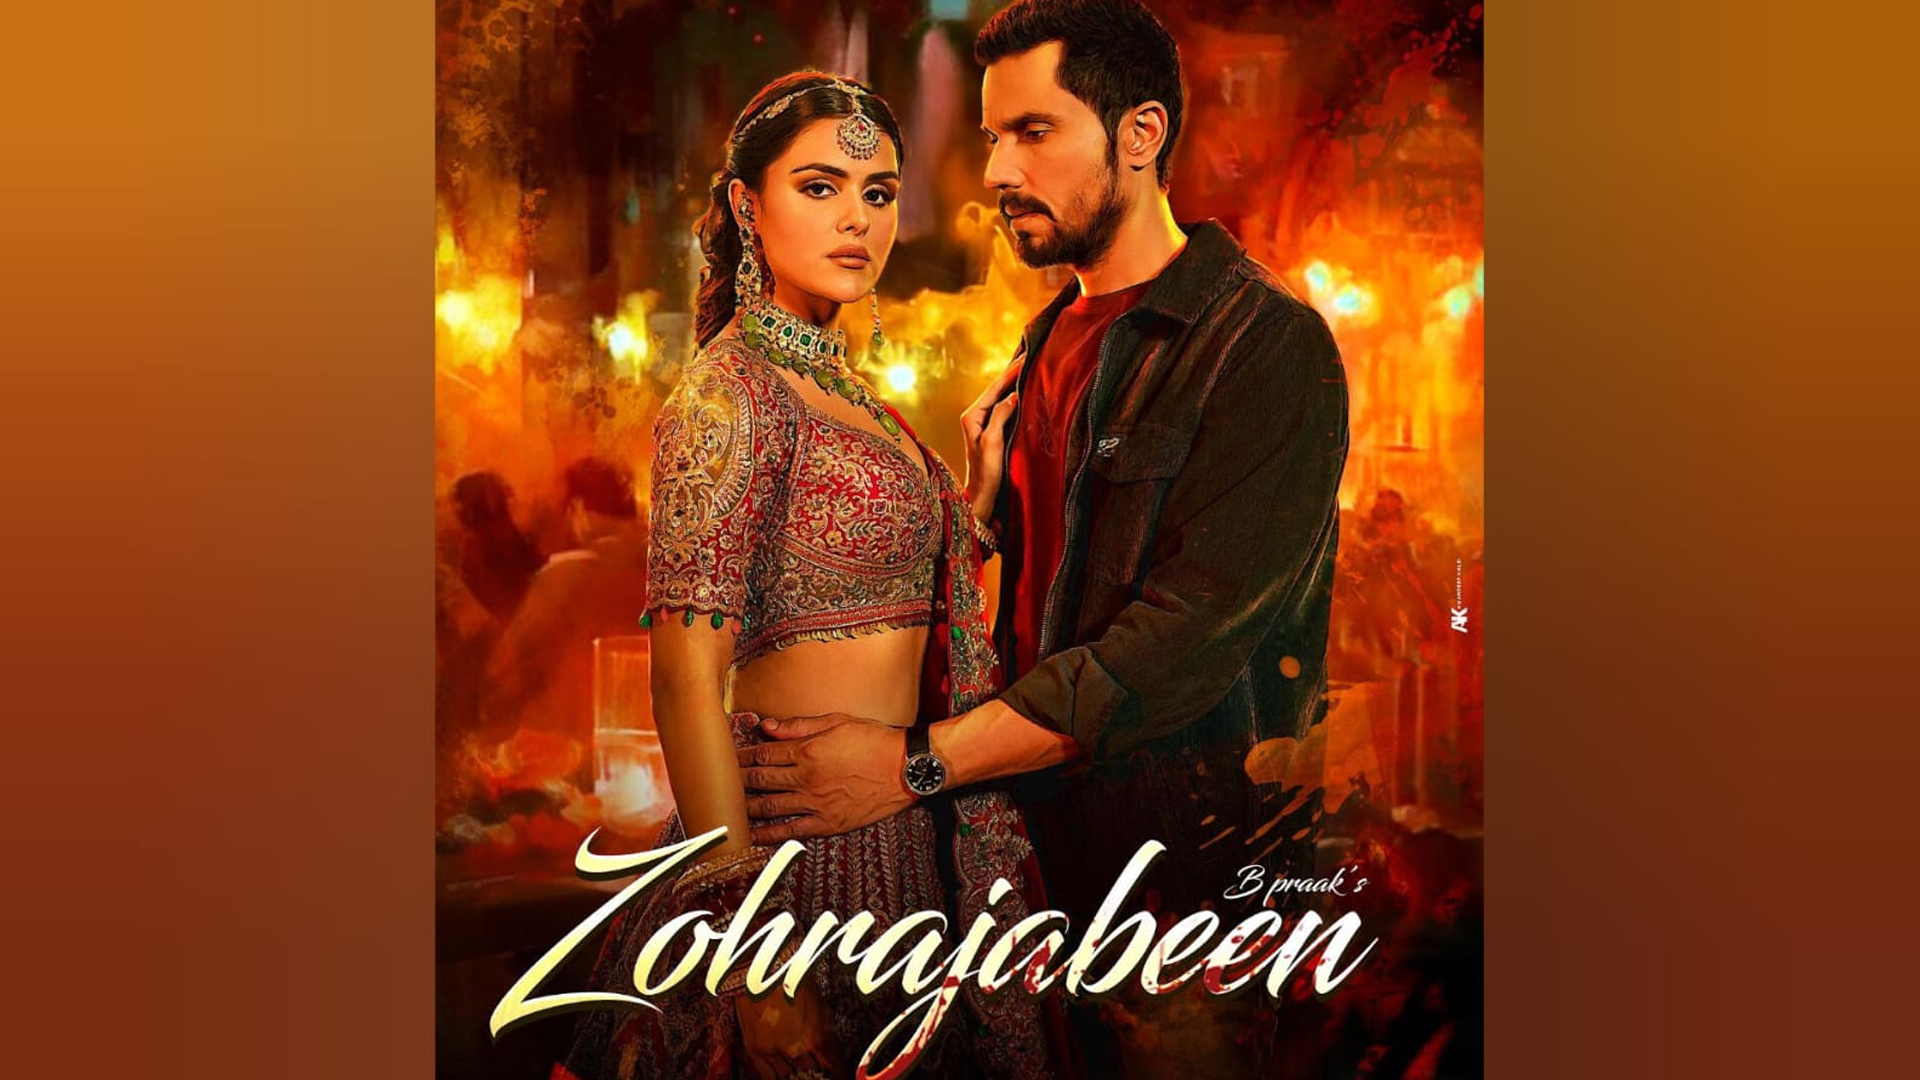 Priyanka Chahar Choudhary Shines as a Mysterious Love Interest in “Zohrajabeen”